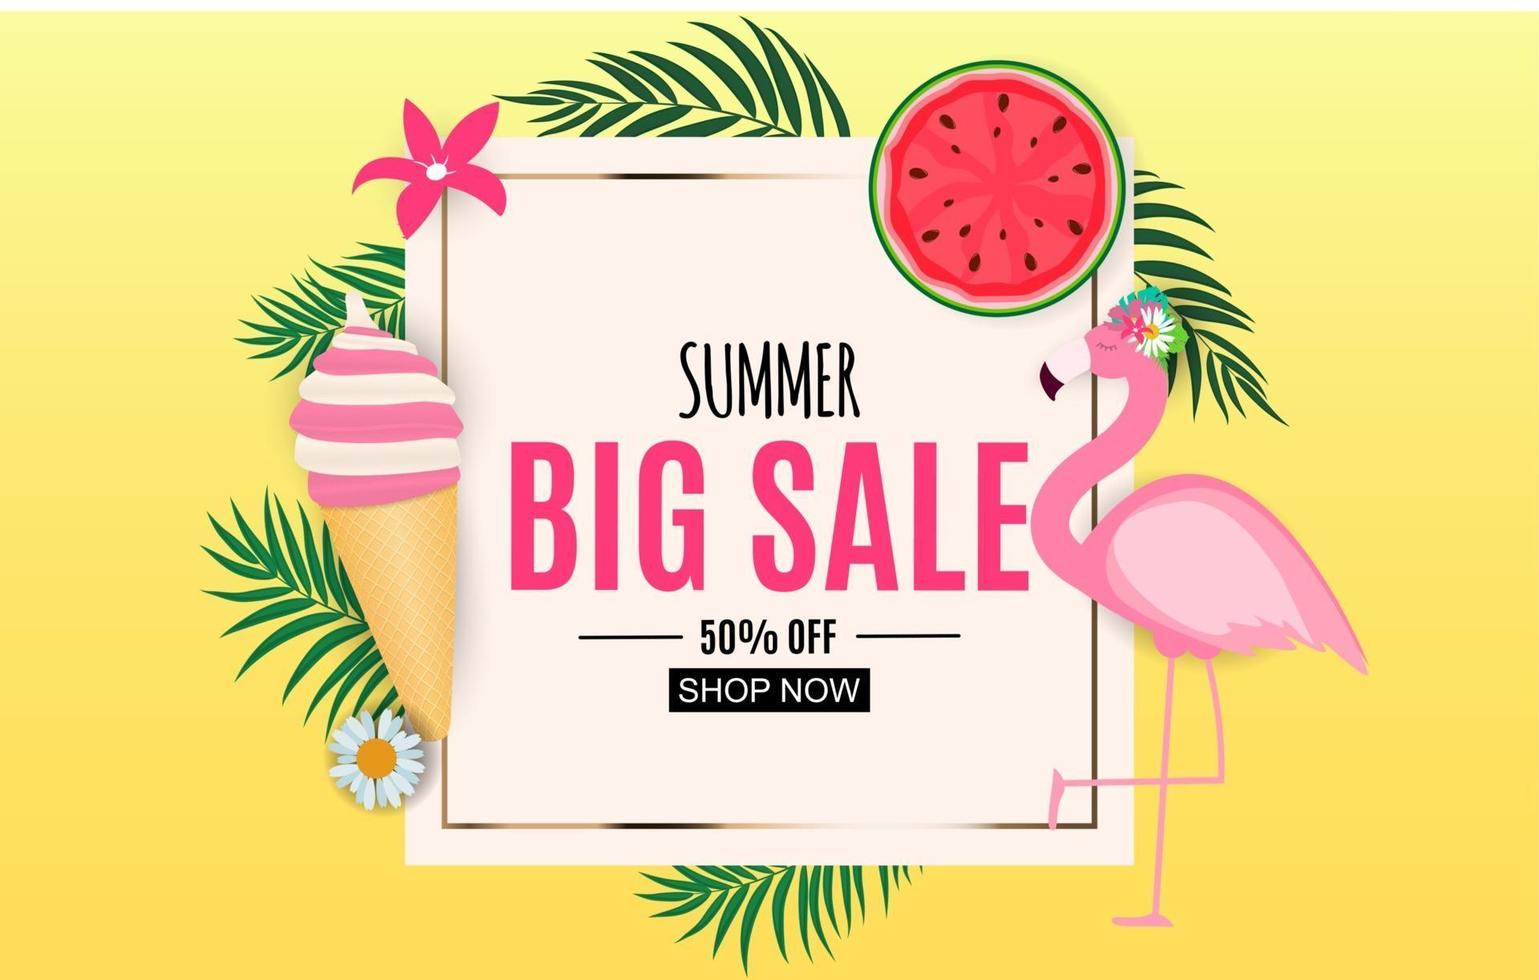 Abstract Summer Sale Background with Palm Leaves, Watermelon, Ice Cream and Flamingo. Vector Illustration